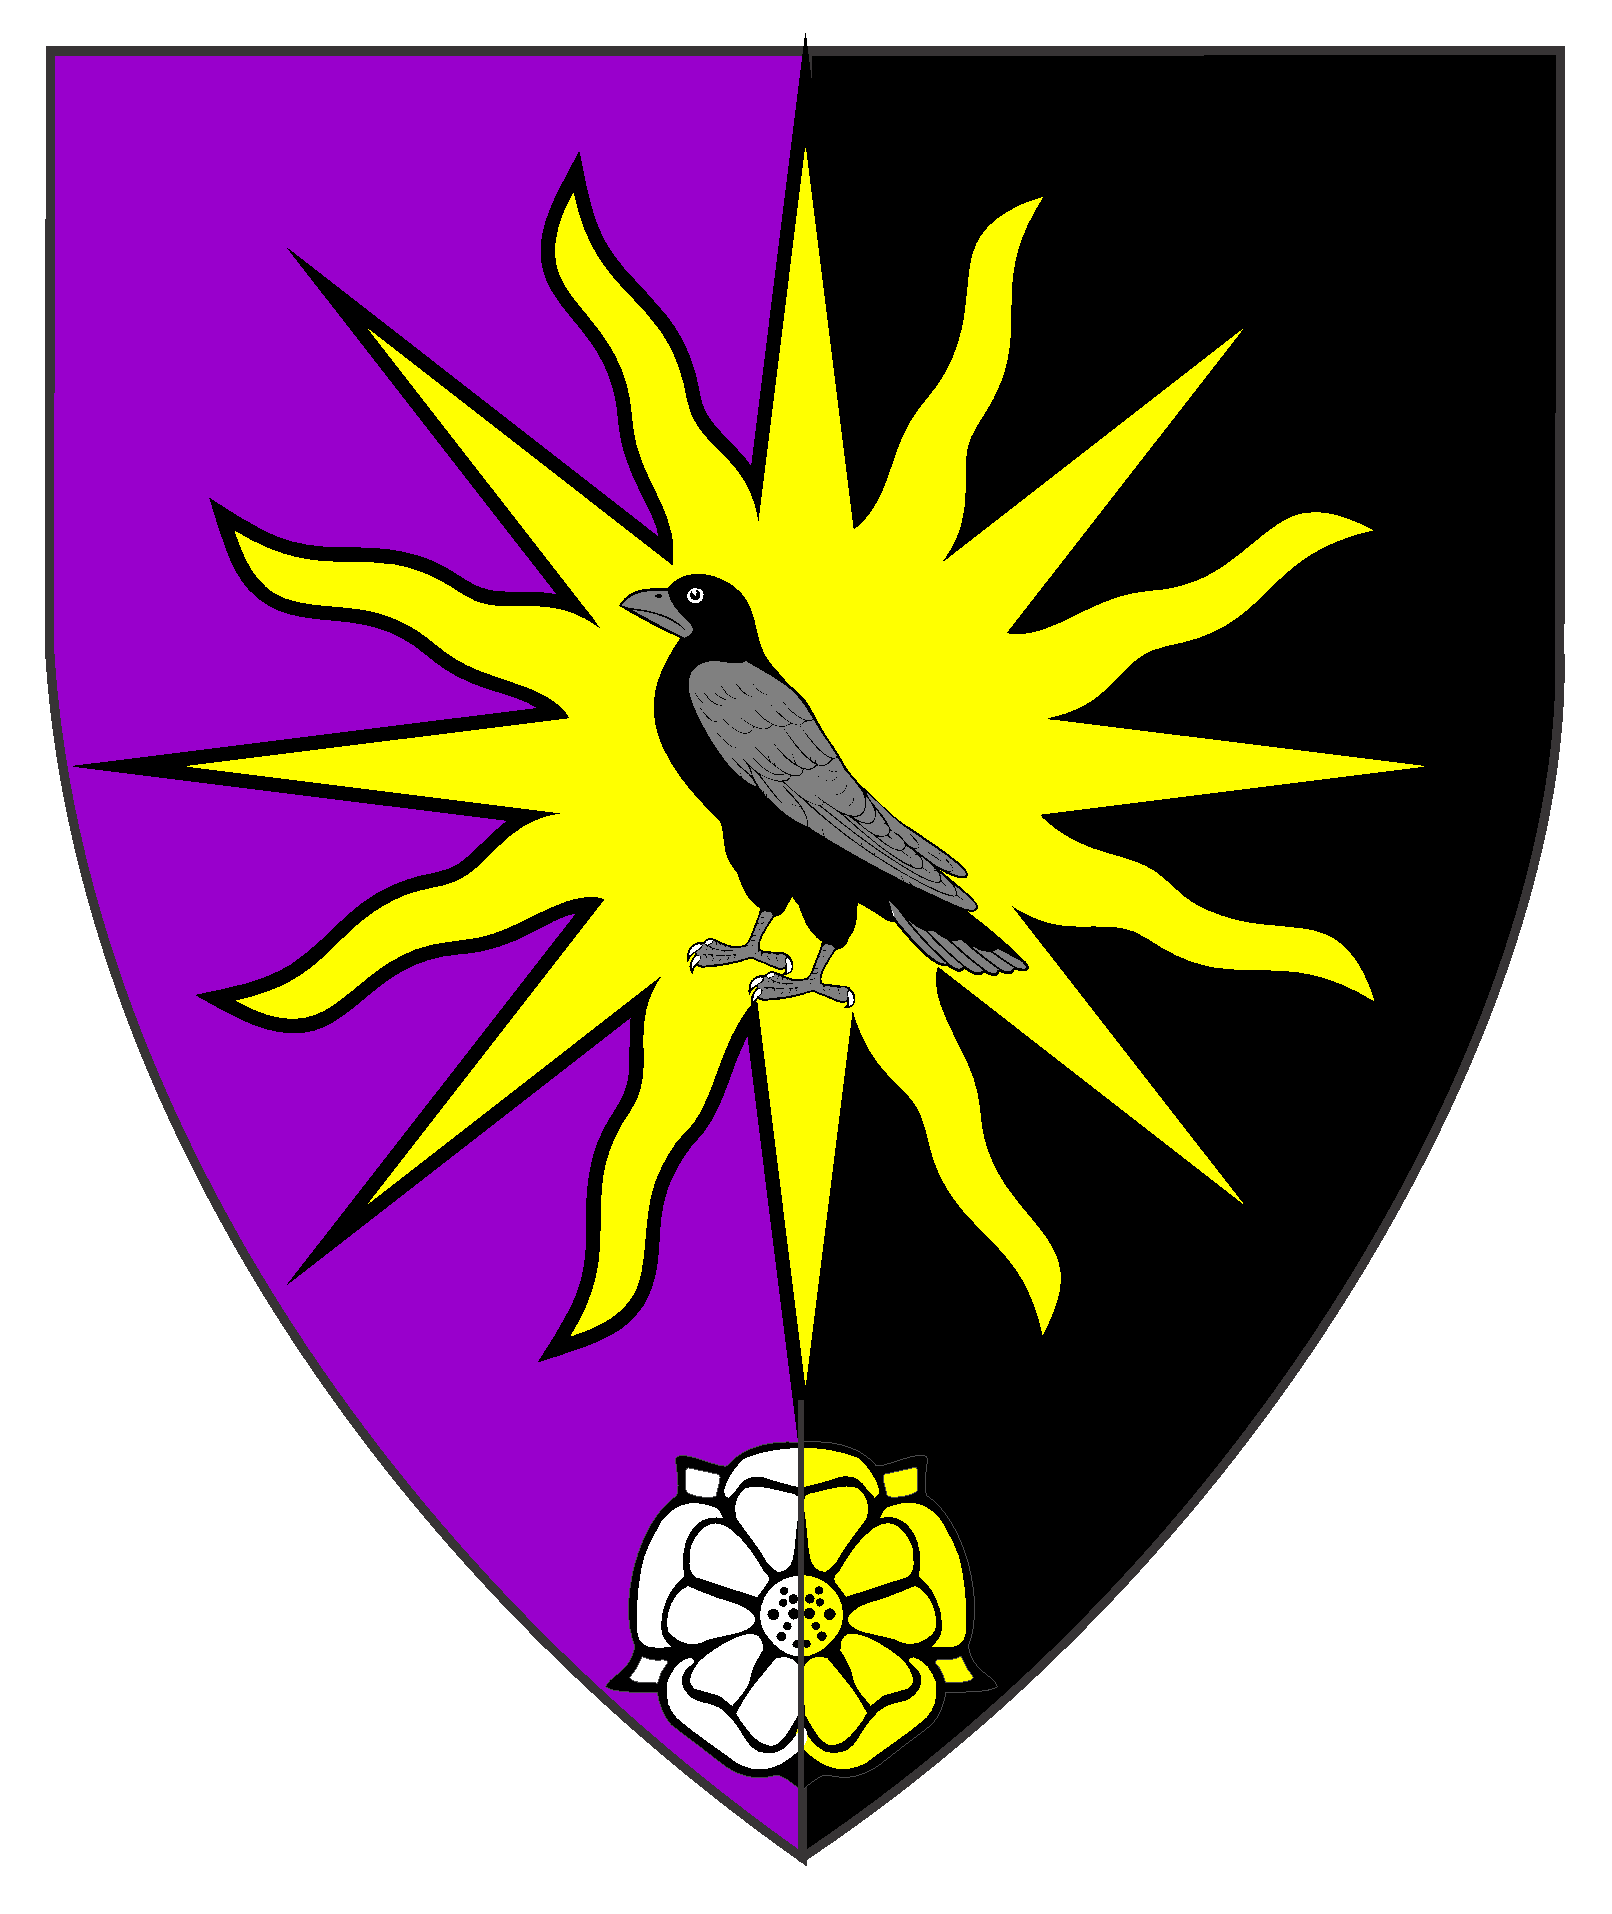 Per pale purpure and sable, on a sun Or a raven sable, in base a rose per pale argent and Or.